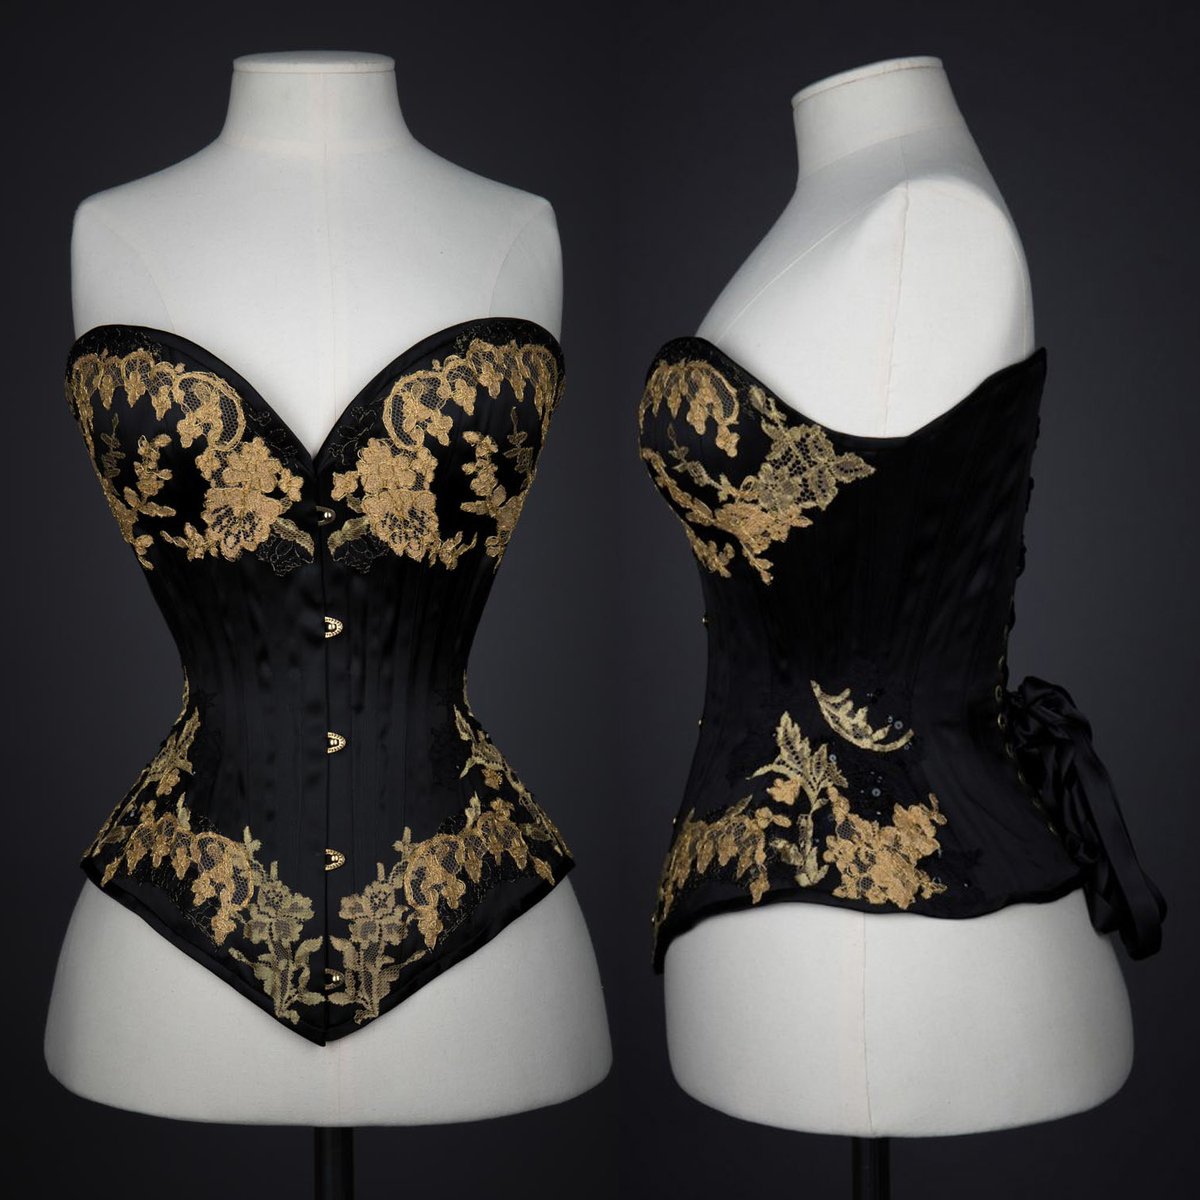 The front busk fastening of this @vanyanis corset has a gold finish with engraved laurel motifs, an antique-inspired technique that was revived by designer Lowana O’Shea with contemporary laser technology. Explore this piece in further detail: underpinningsmuseum.com/museum-collect…